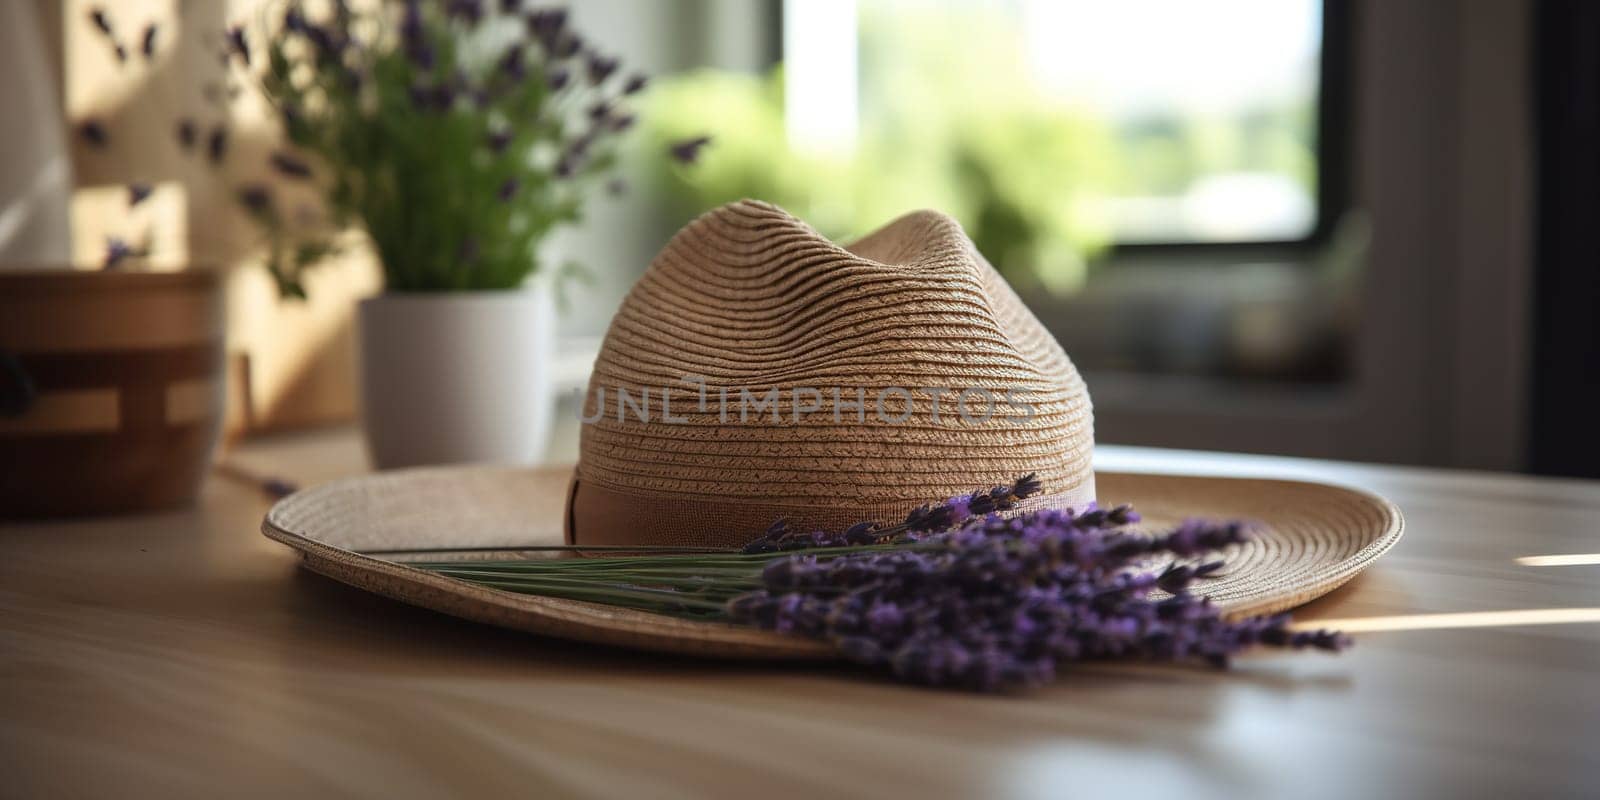 Straw Hat With Lavender Sprigs by tan4ikk1